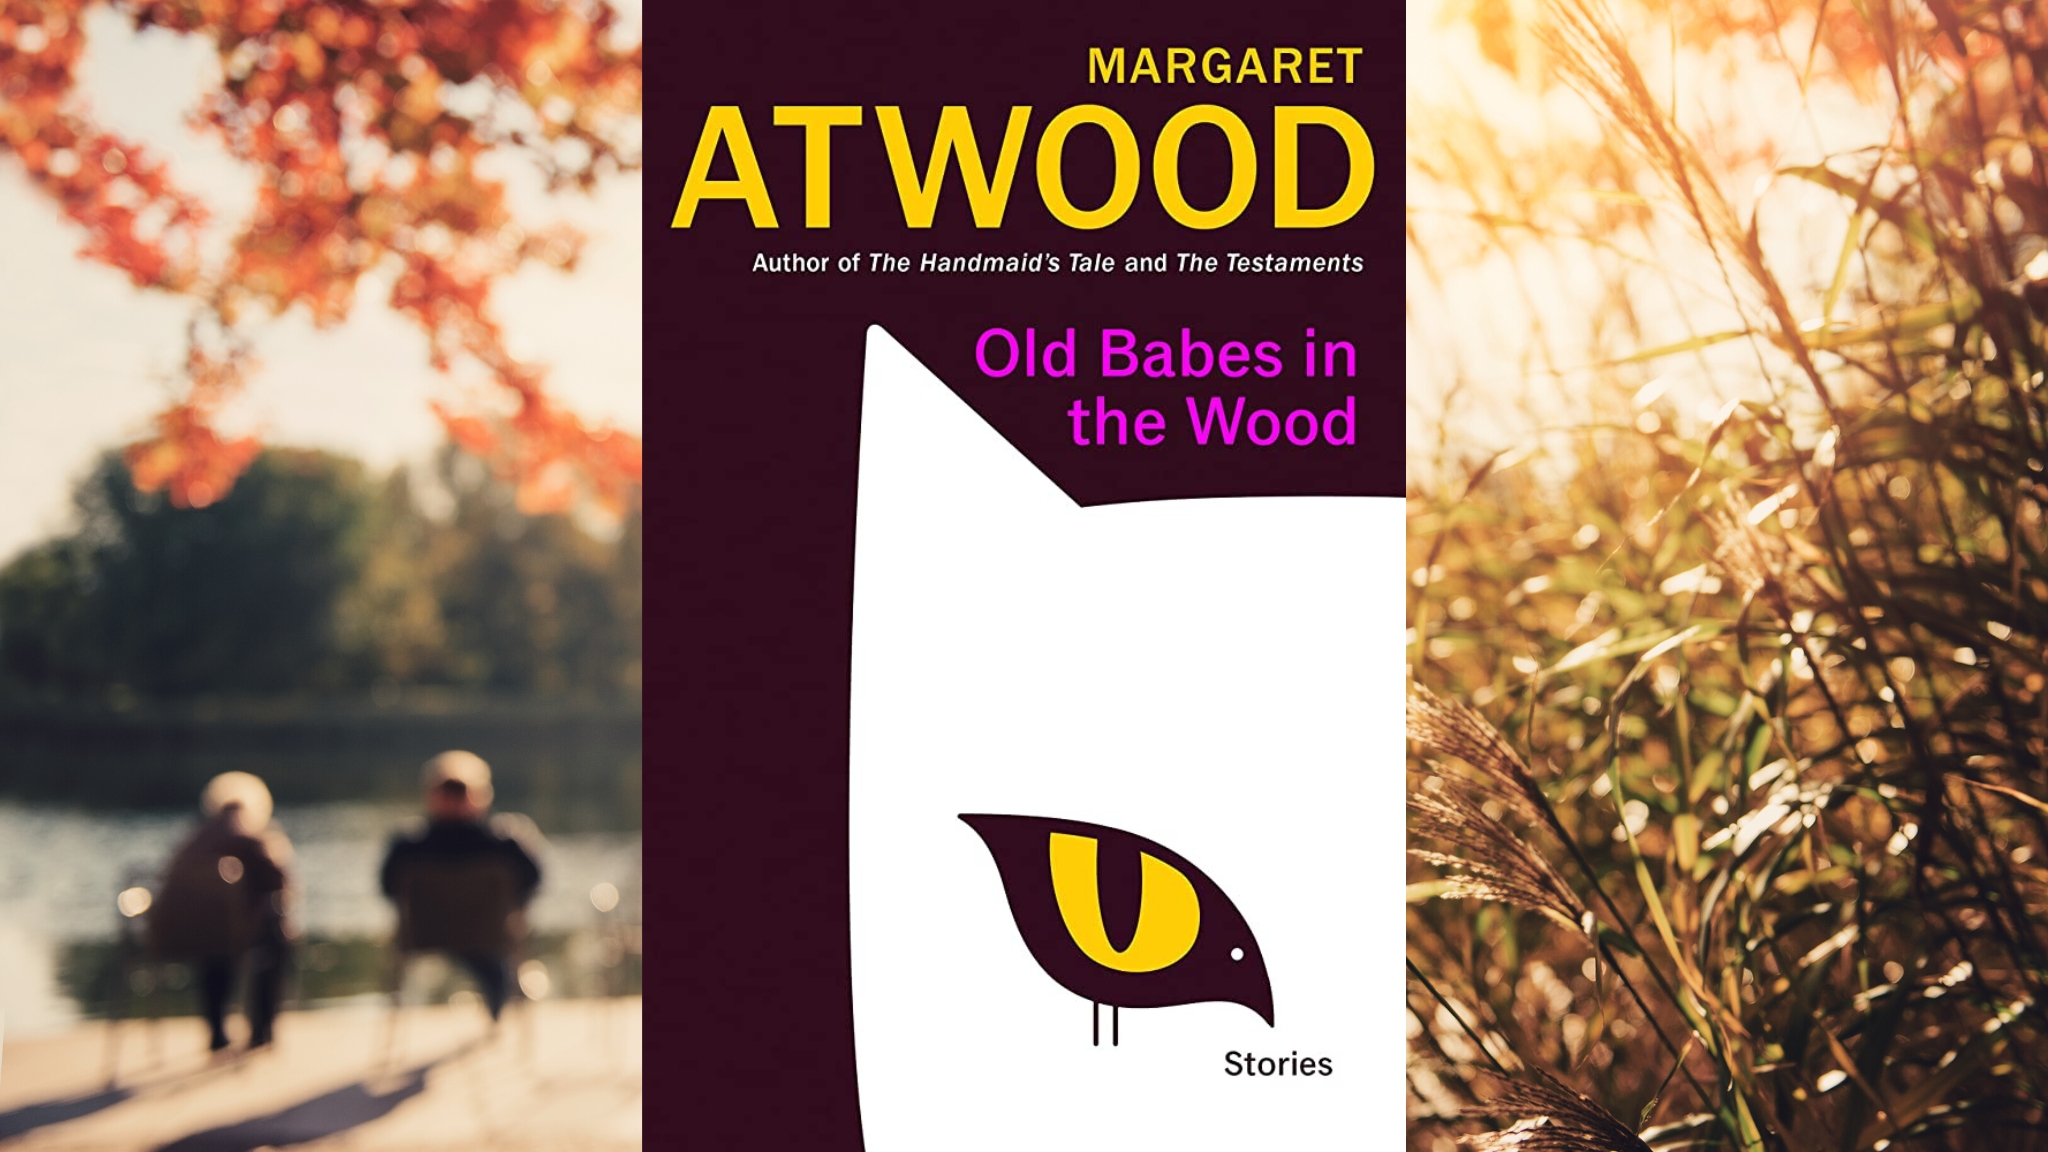 Margaret Atwood Looks at Love, Loss & Memory in New